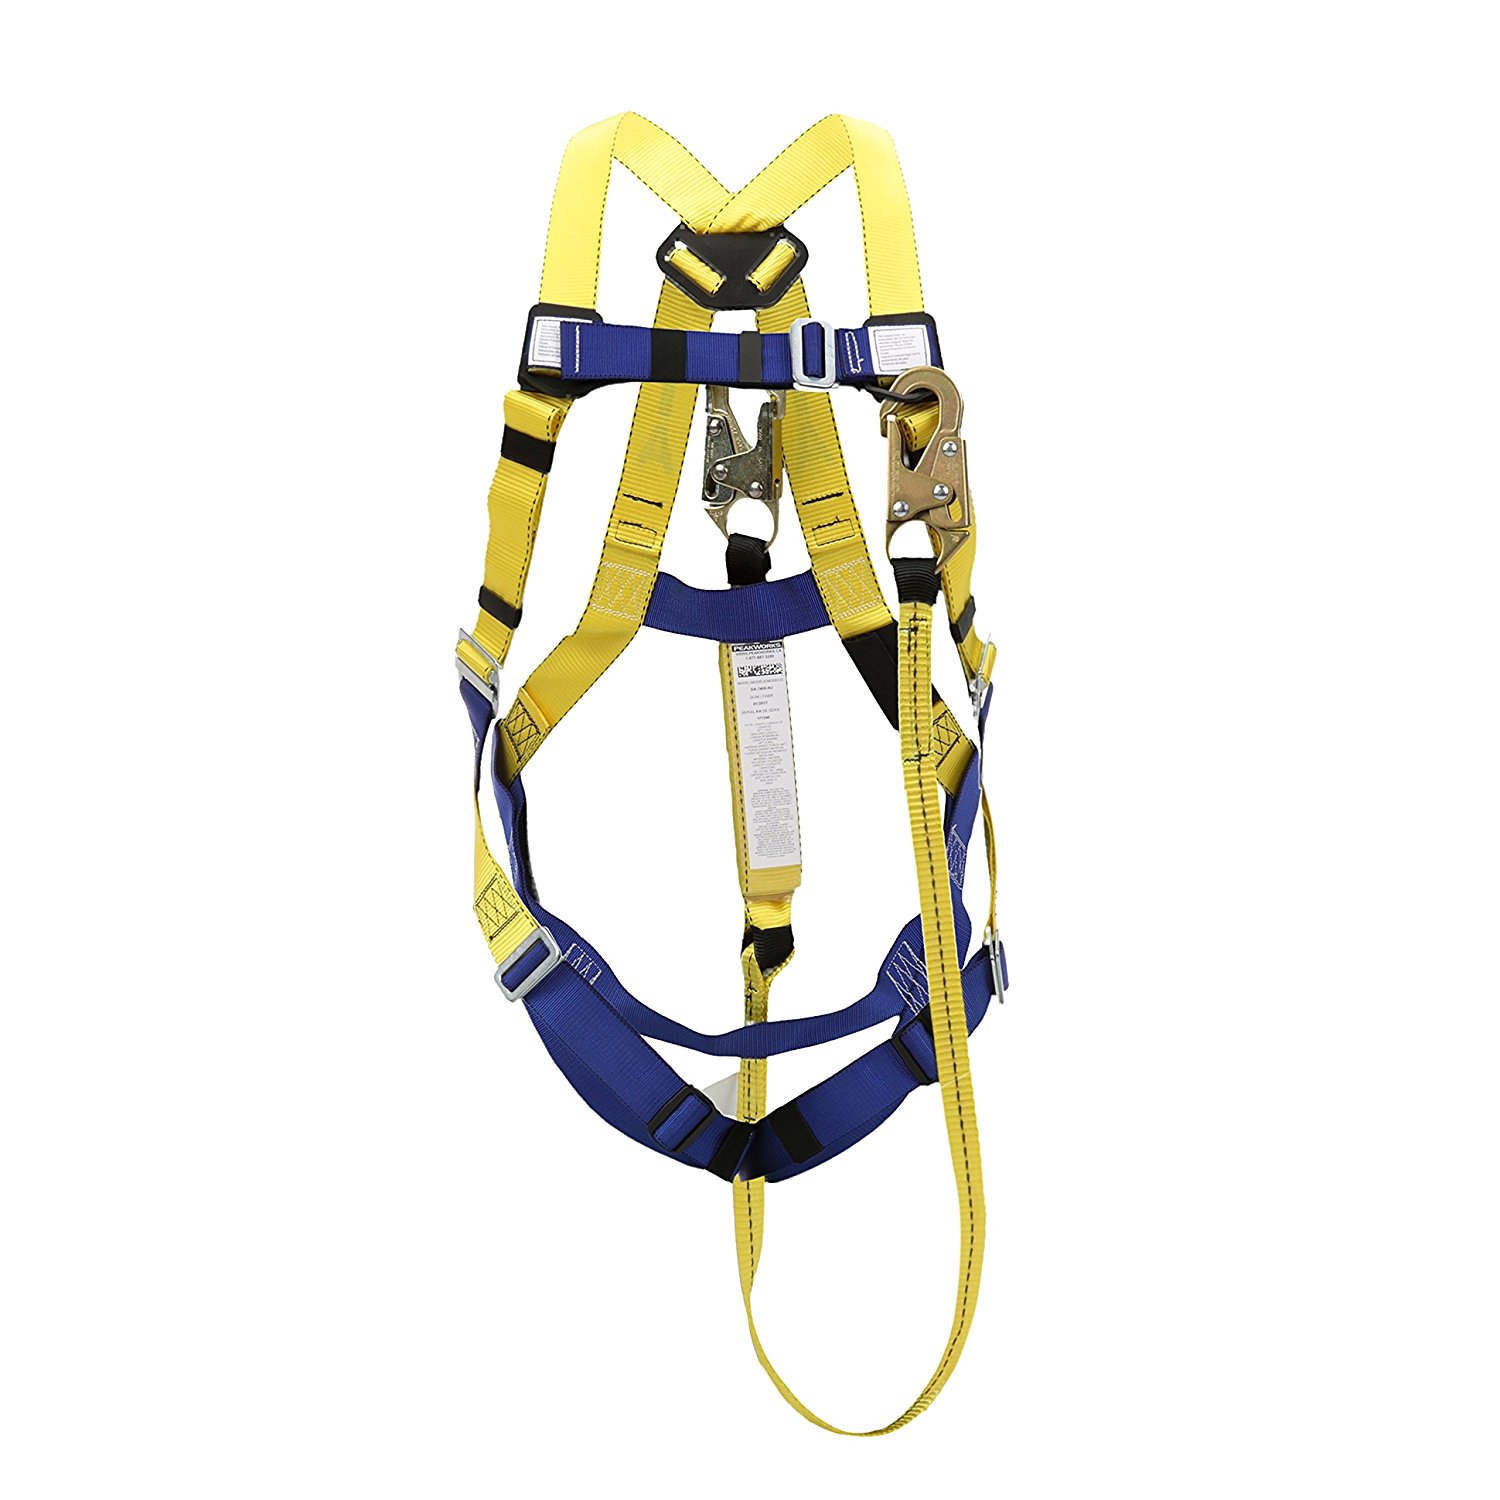 10 Best Safety Harnesses For Work - Wonderful Engineering